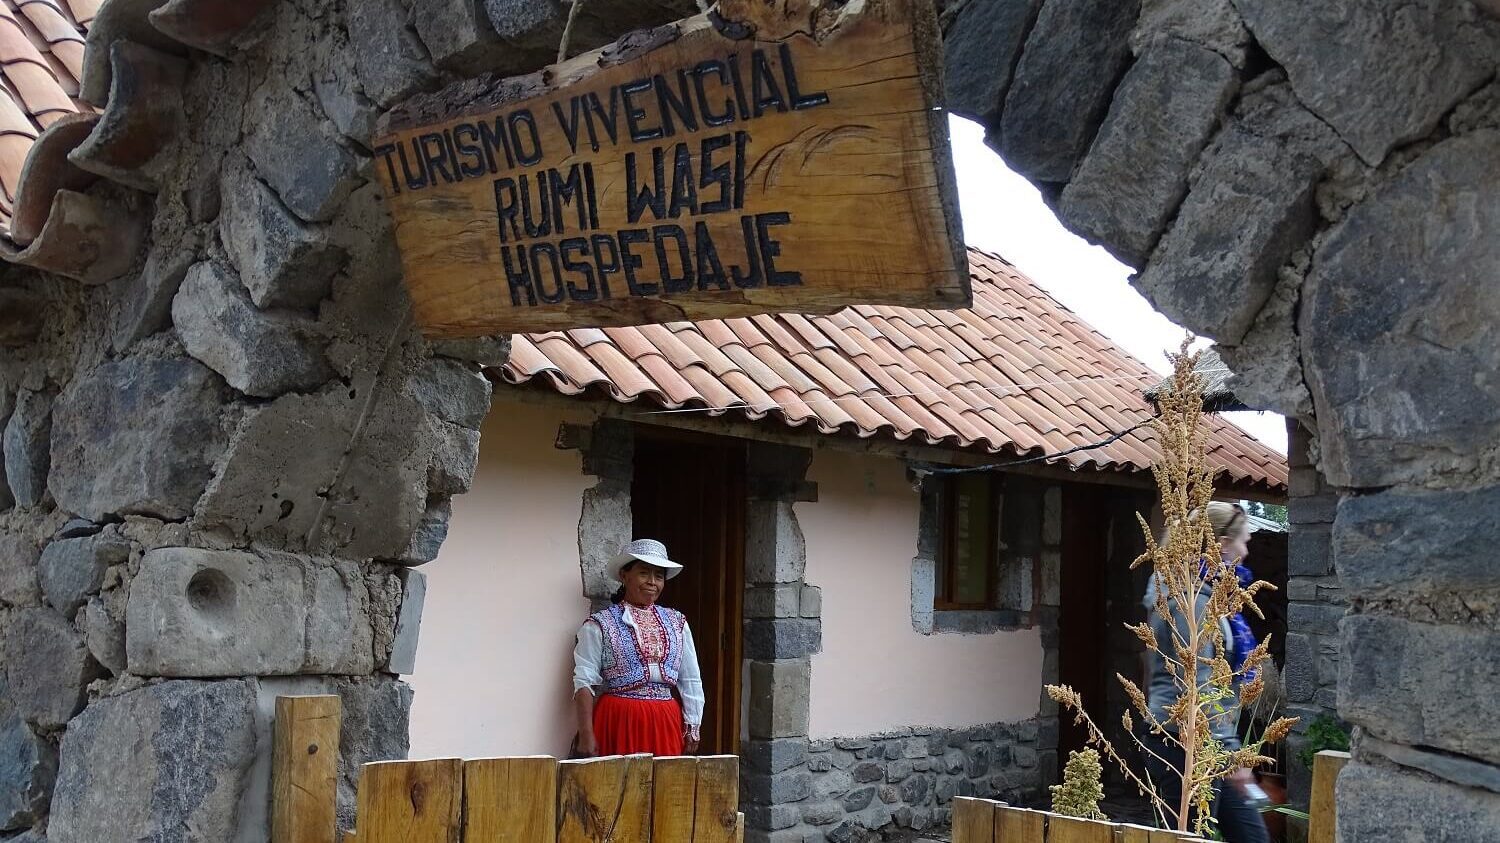 Local homestay in the Colca Canyon. Community-Based tourism in Coporaque, Colca Canyon, Peru | RESPONSible Travel Peru